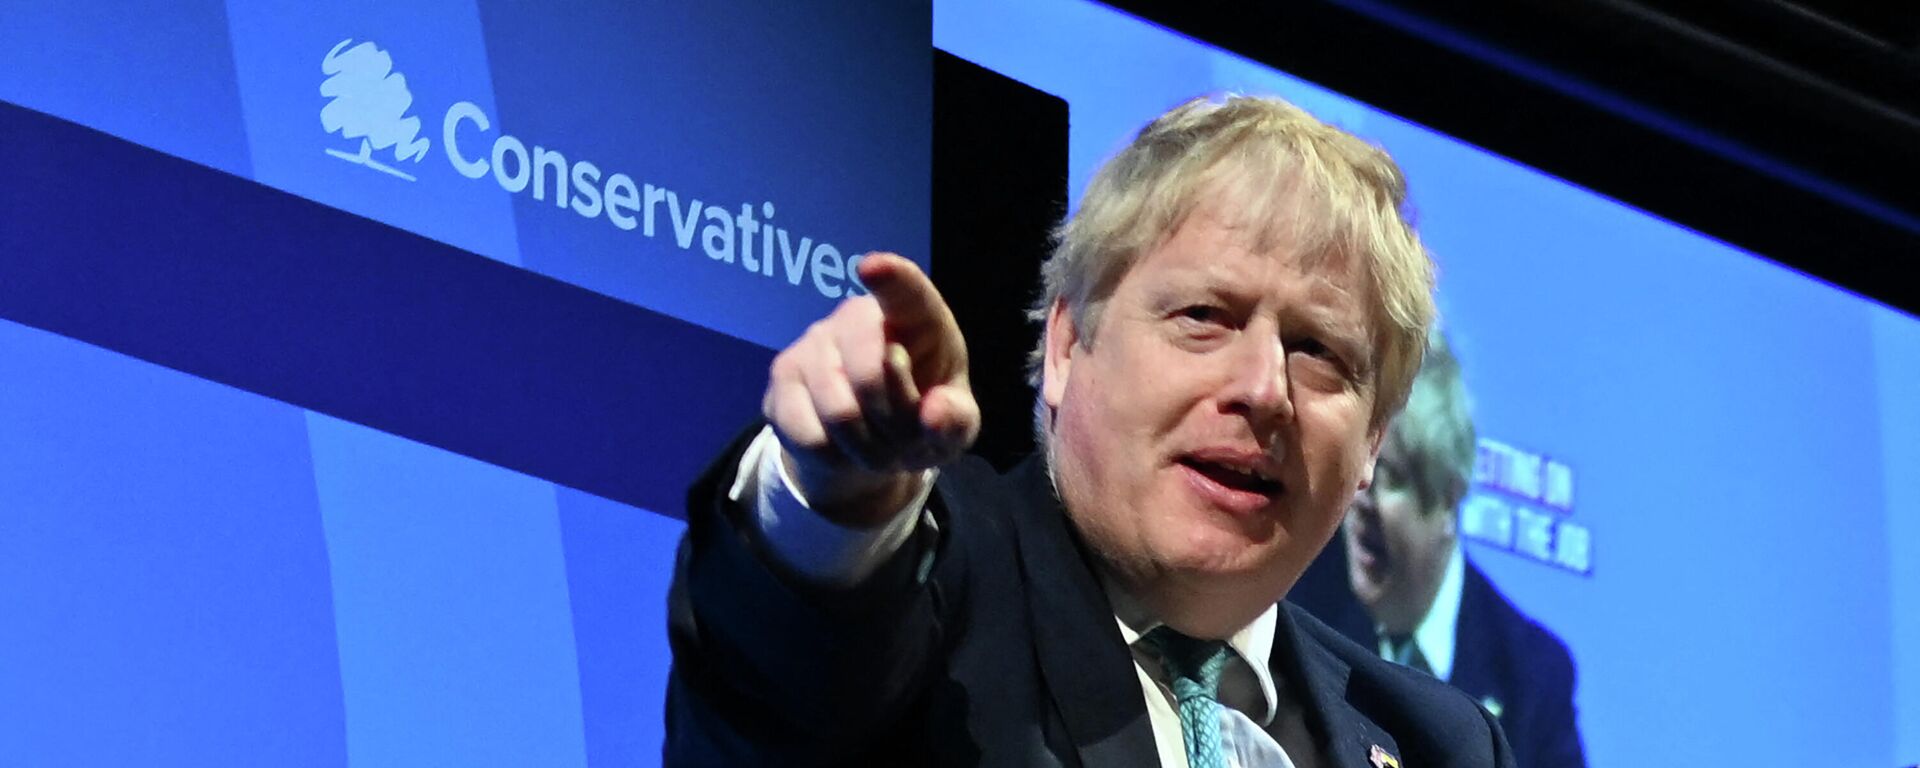 Britain's Prime Minister Boris Johnson speaks during the Conservative Party Spring Conference at Blackpool Winter Gardens in Blackpool, north-west England, on March 19, 2022 - Sputnik International, 1920, 14.04.2022